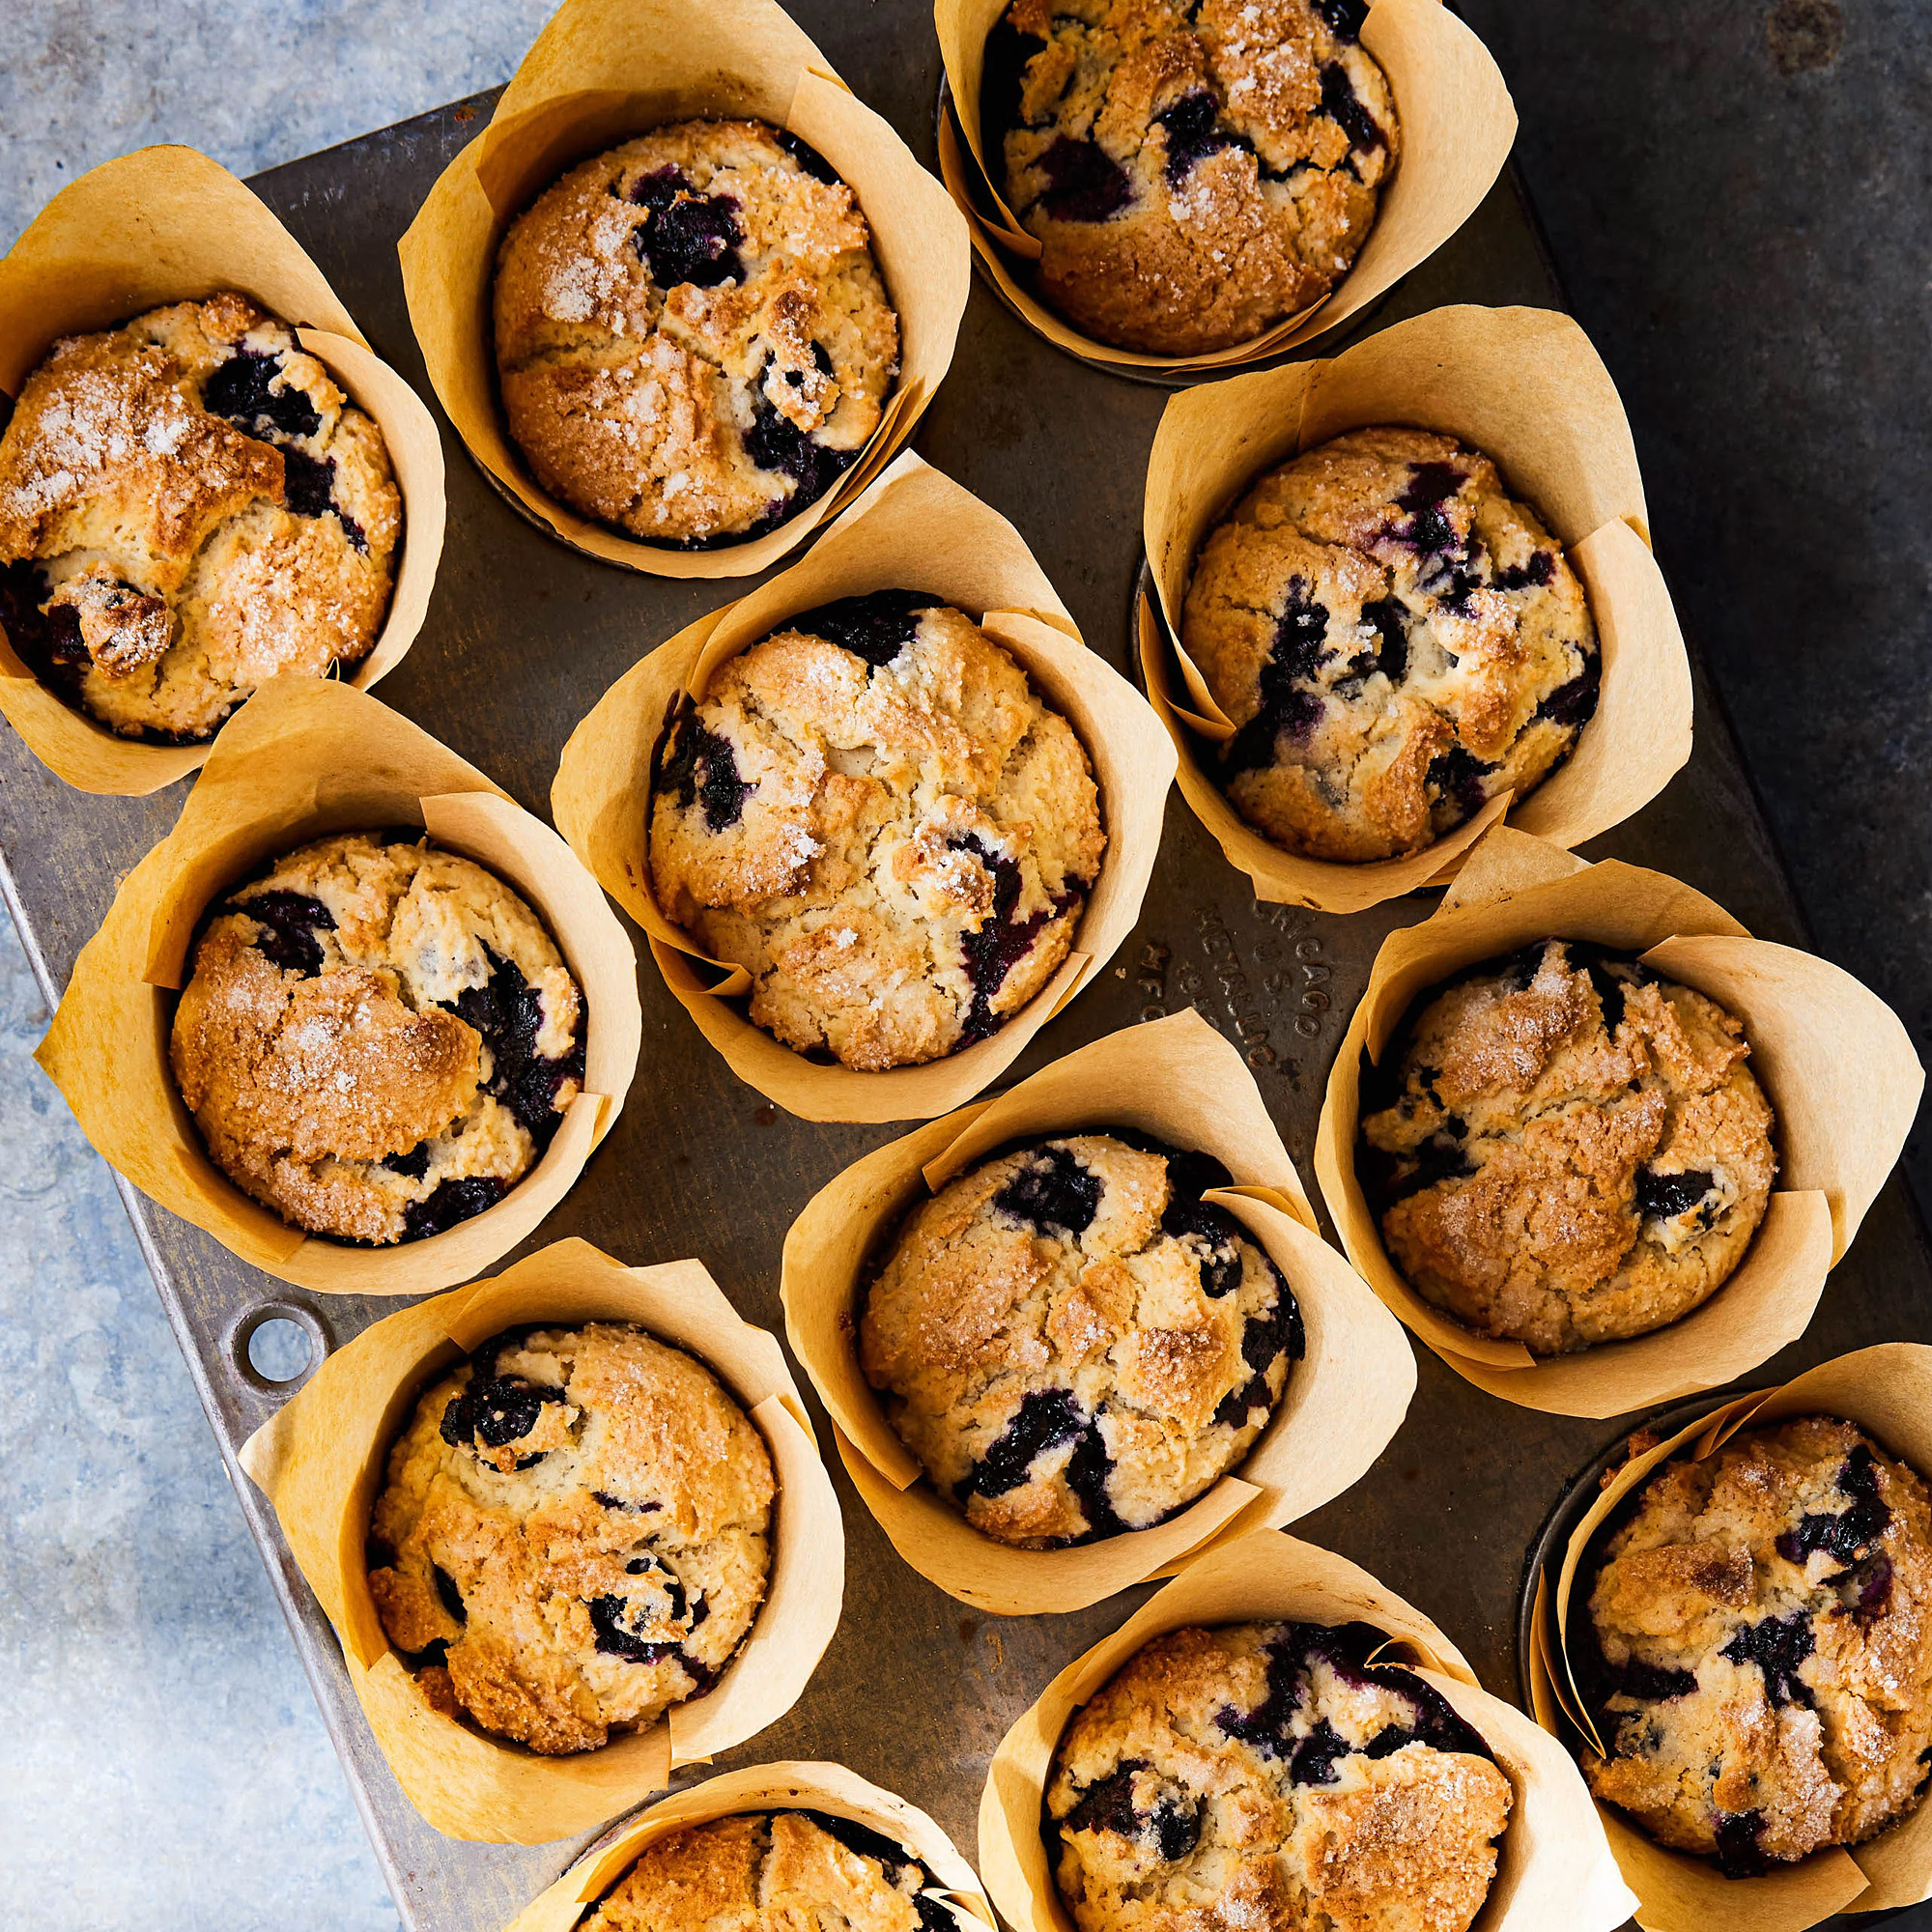 Blueberry Olive Oil Muffins Recipe